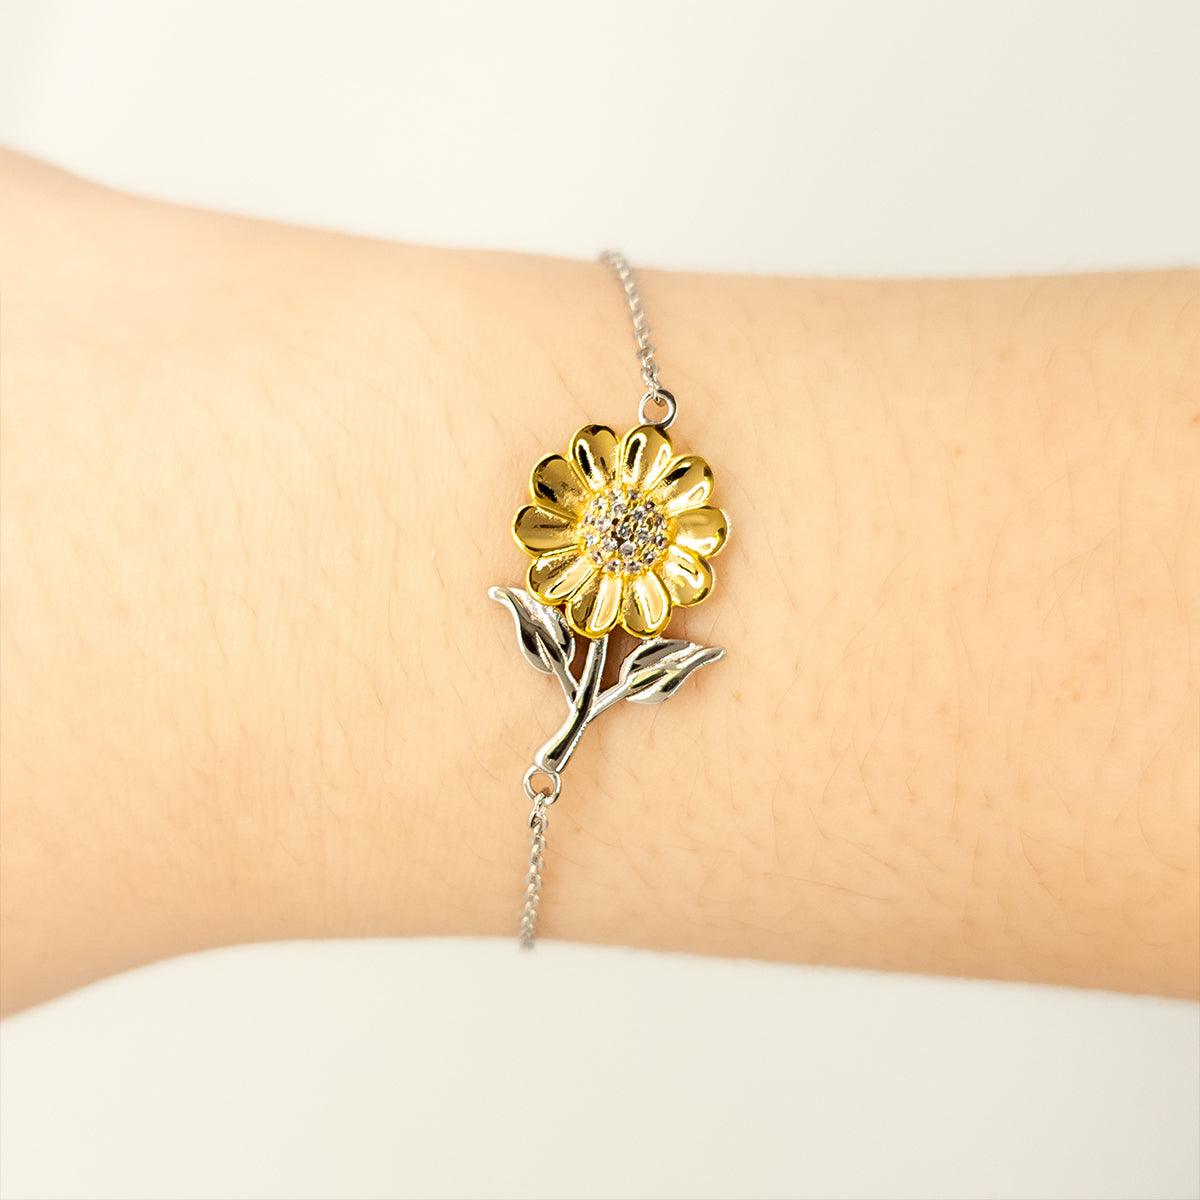 Sarcastic Loan Officer Sunflower Bracelet Gifts, Christmas Holiday Gifts for Loan Officer Birthday Message Card, Loan Officer: Because greatness is woven into the fabric of every day, Coworkers, Friends - Mallard Moon Gift Shop